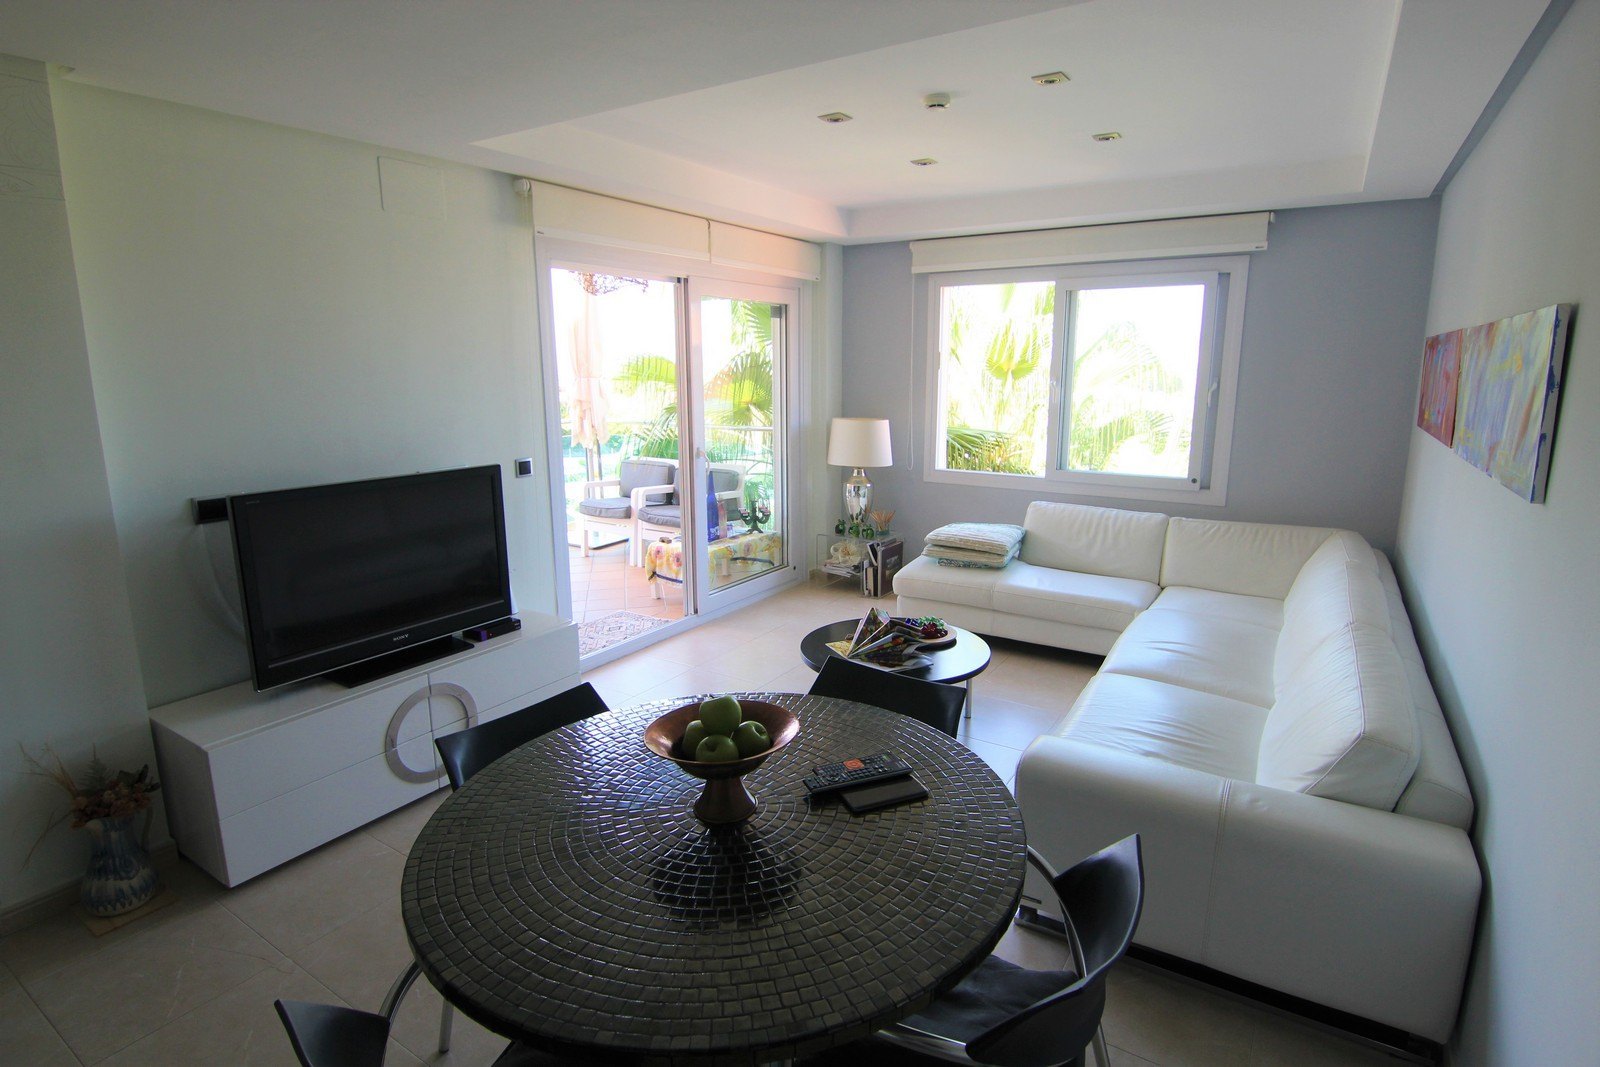 Apartment for sale with pool in Calistros Benitatxell.